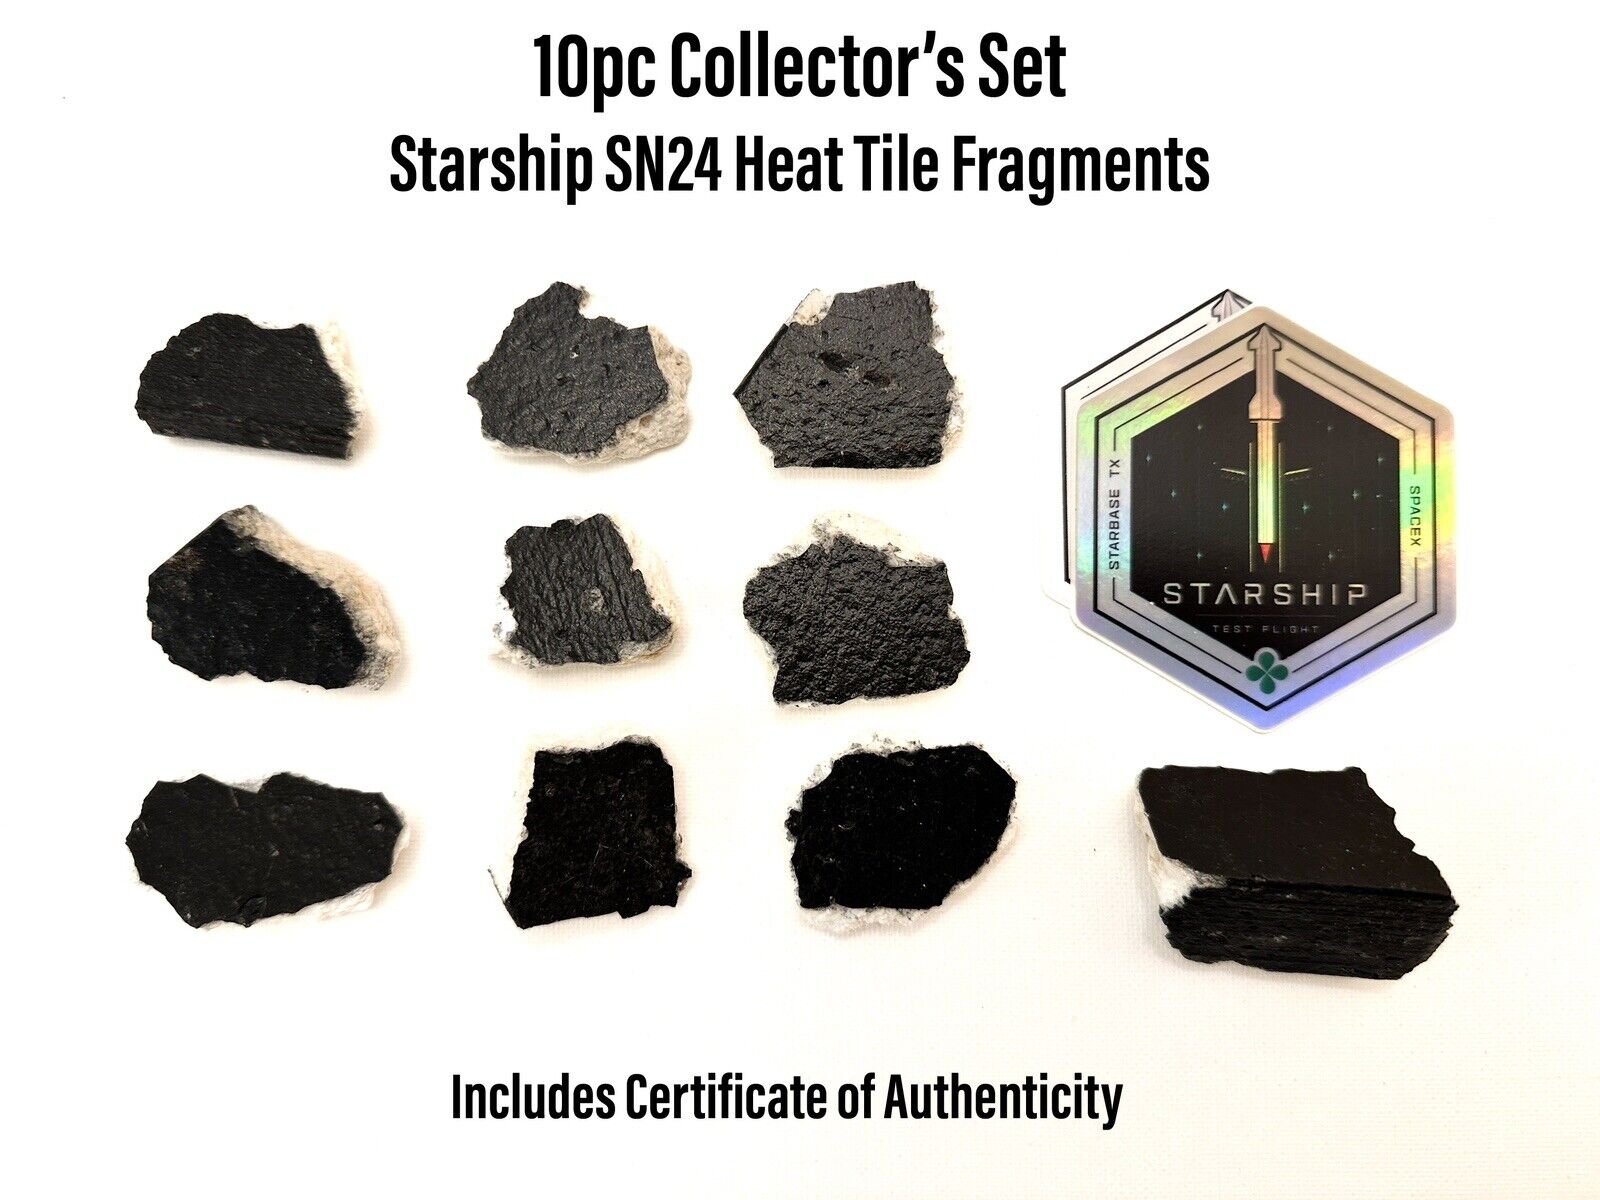 SpaceX Starship SN24 Heat Shield Tile Fragments & Sticker 10pc Collector’s Set